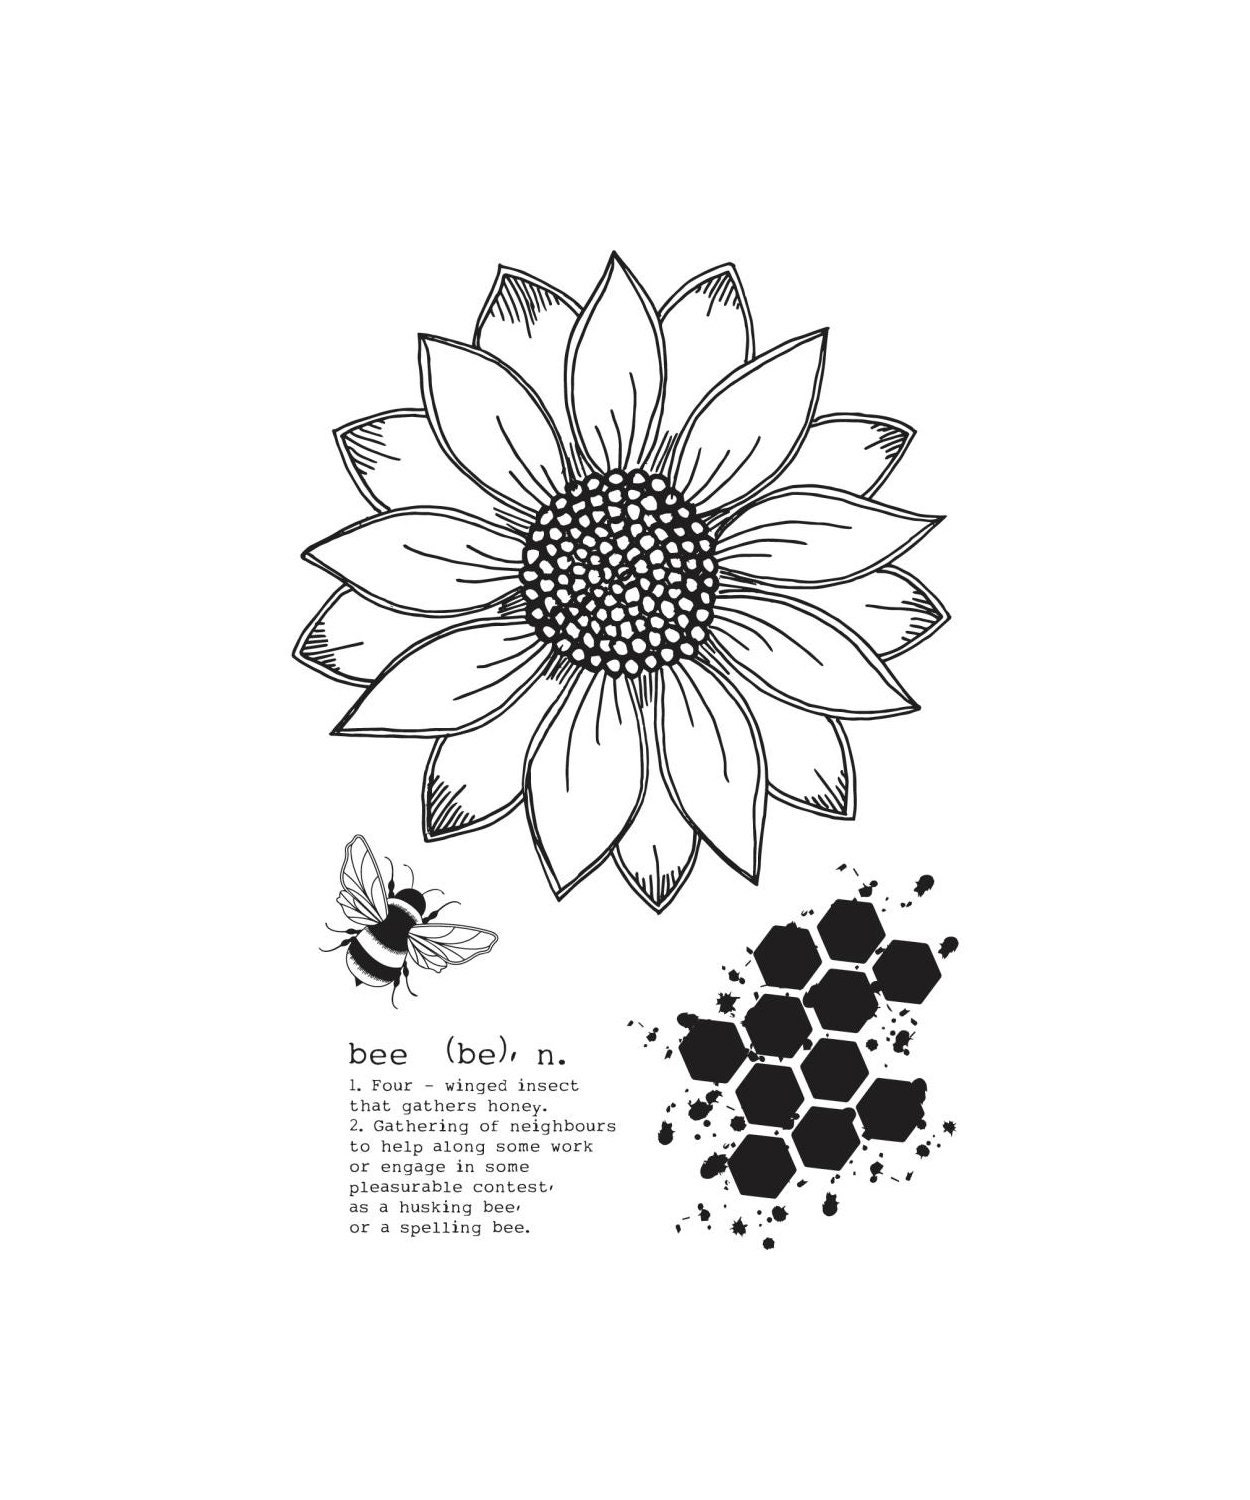 Prima, Ruby Violet, Cling Rubber Stamps, Whimsical Stamps, Grass Stamp,  Journaling Stamps, Flower Stamps. Quote Stamps, Blank Lines Stamp